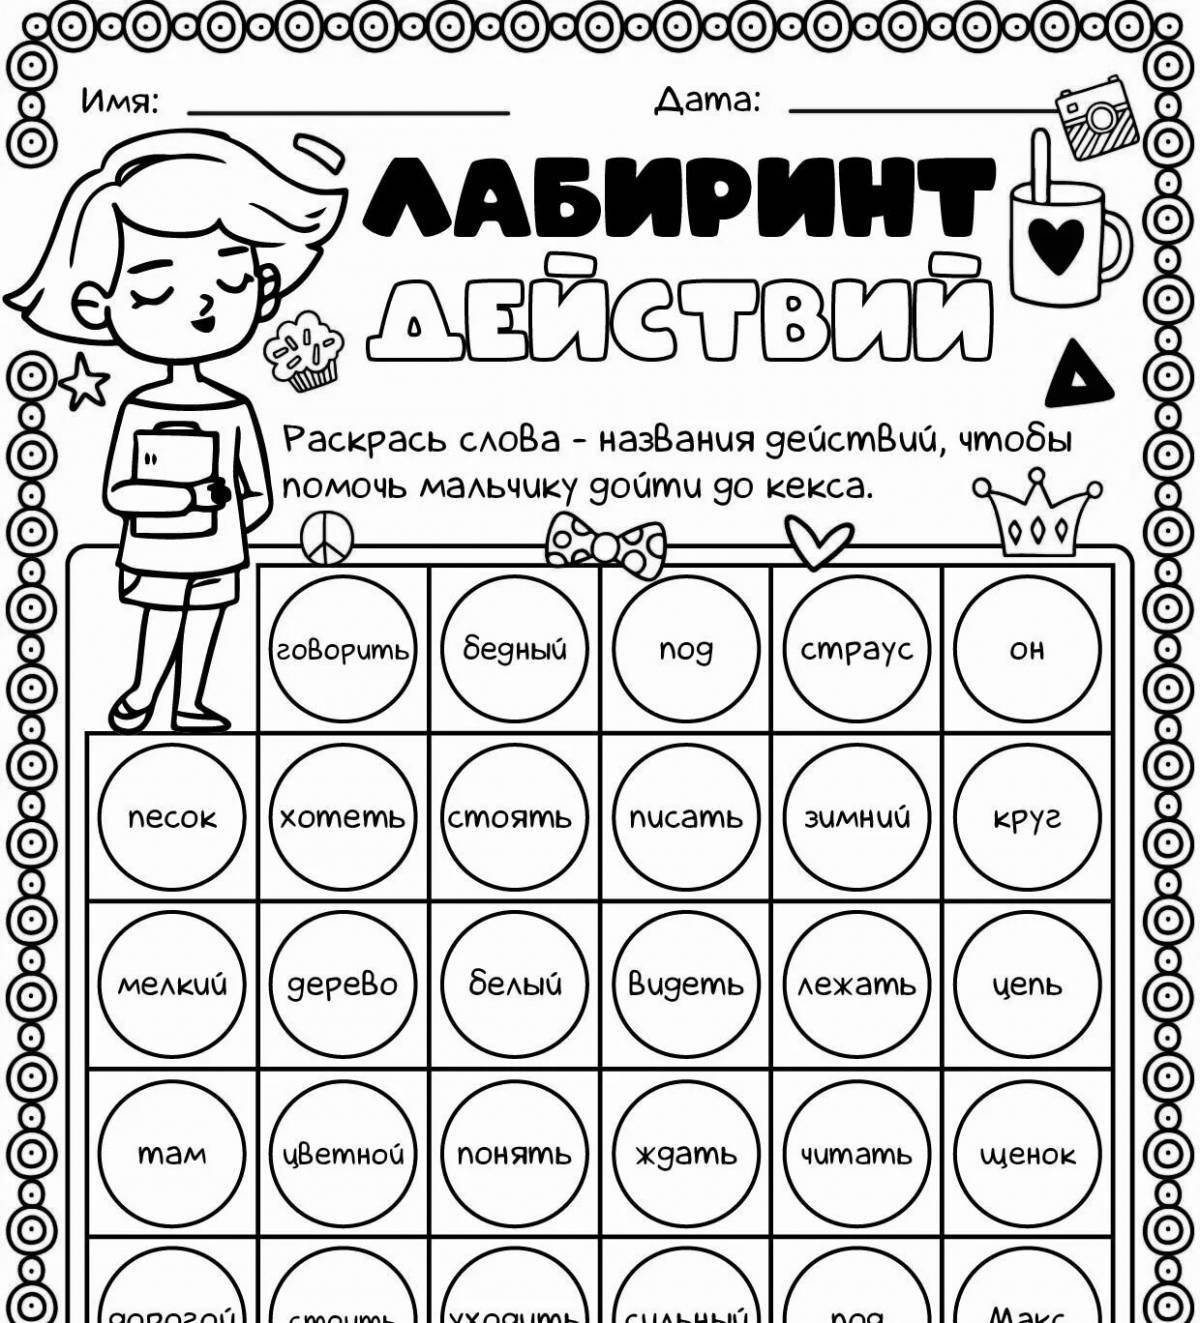 Dynamic verb coloring page